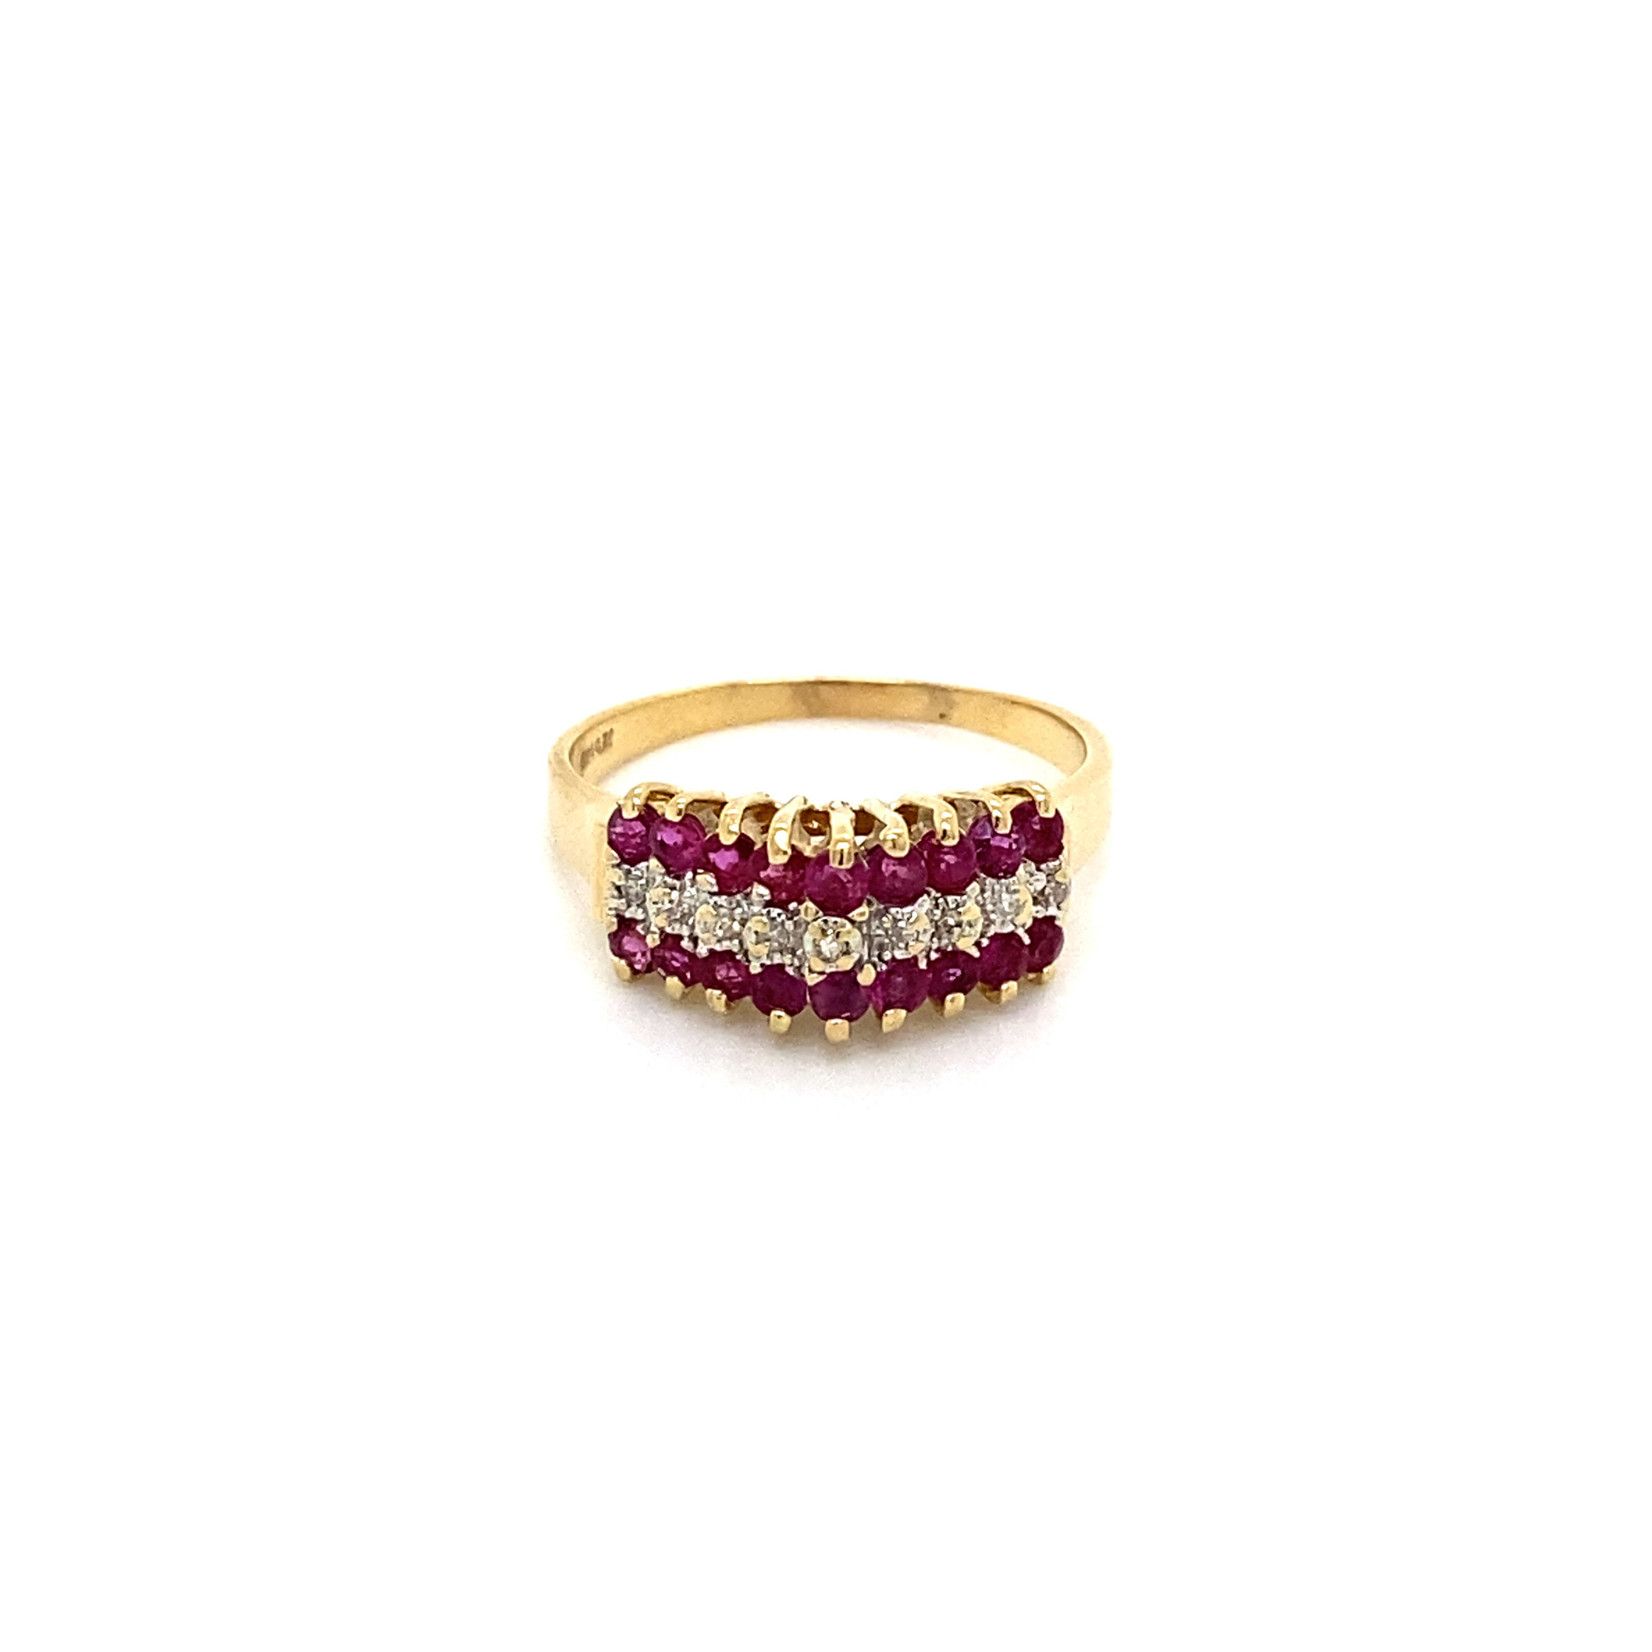 14K Yellow Gold Pyramid style Ruby and Diamond Ring size 7.5 